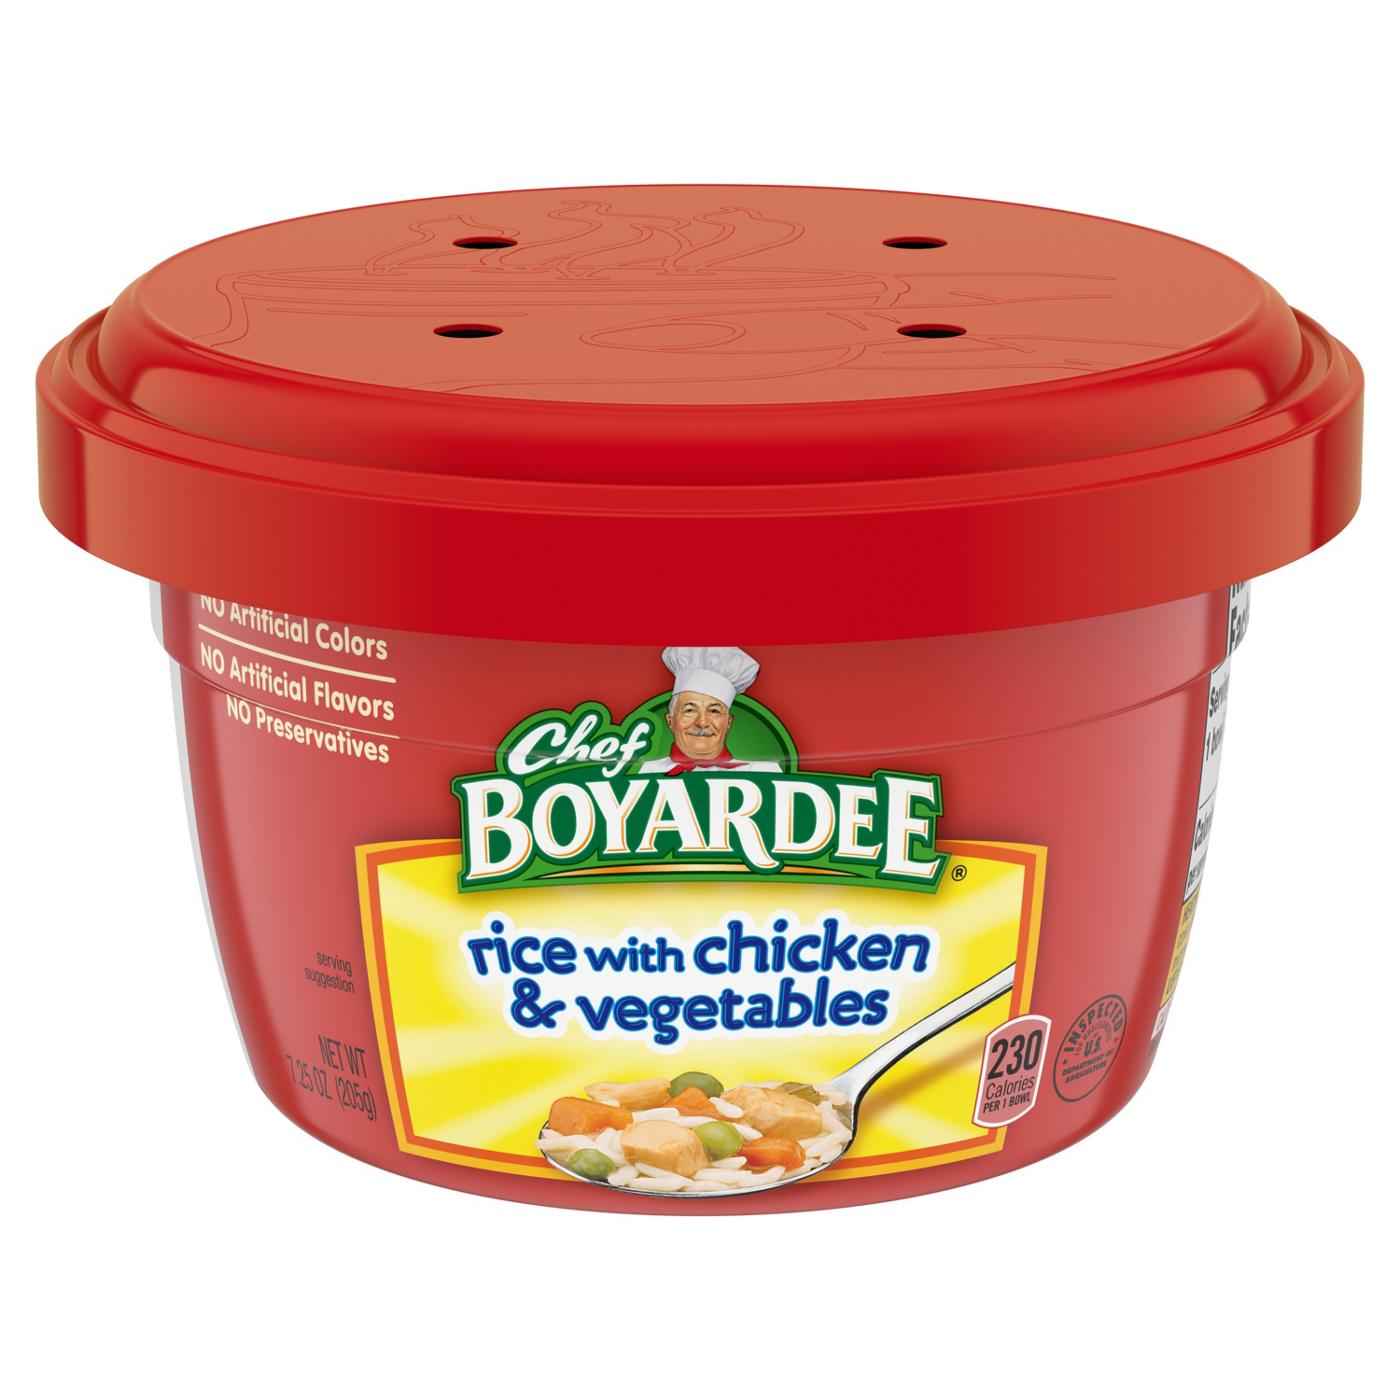 Chef Boyardee Rice with Chicken & Vegetables; image 1 of 7